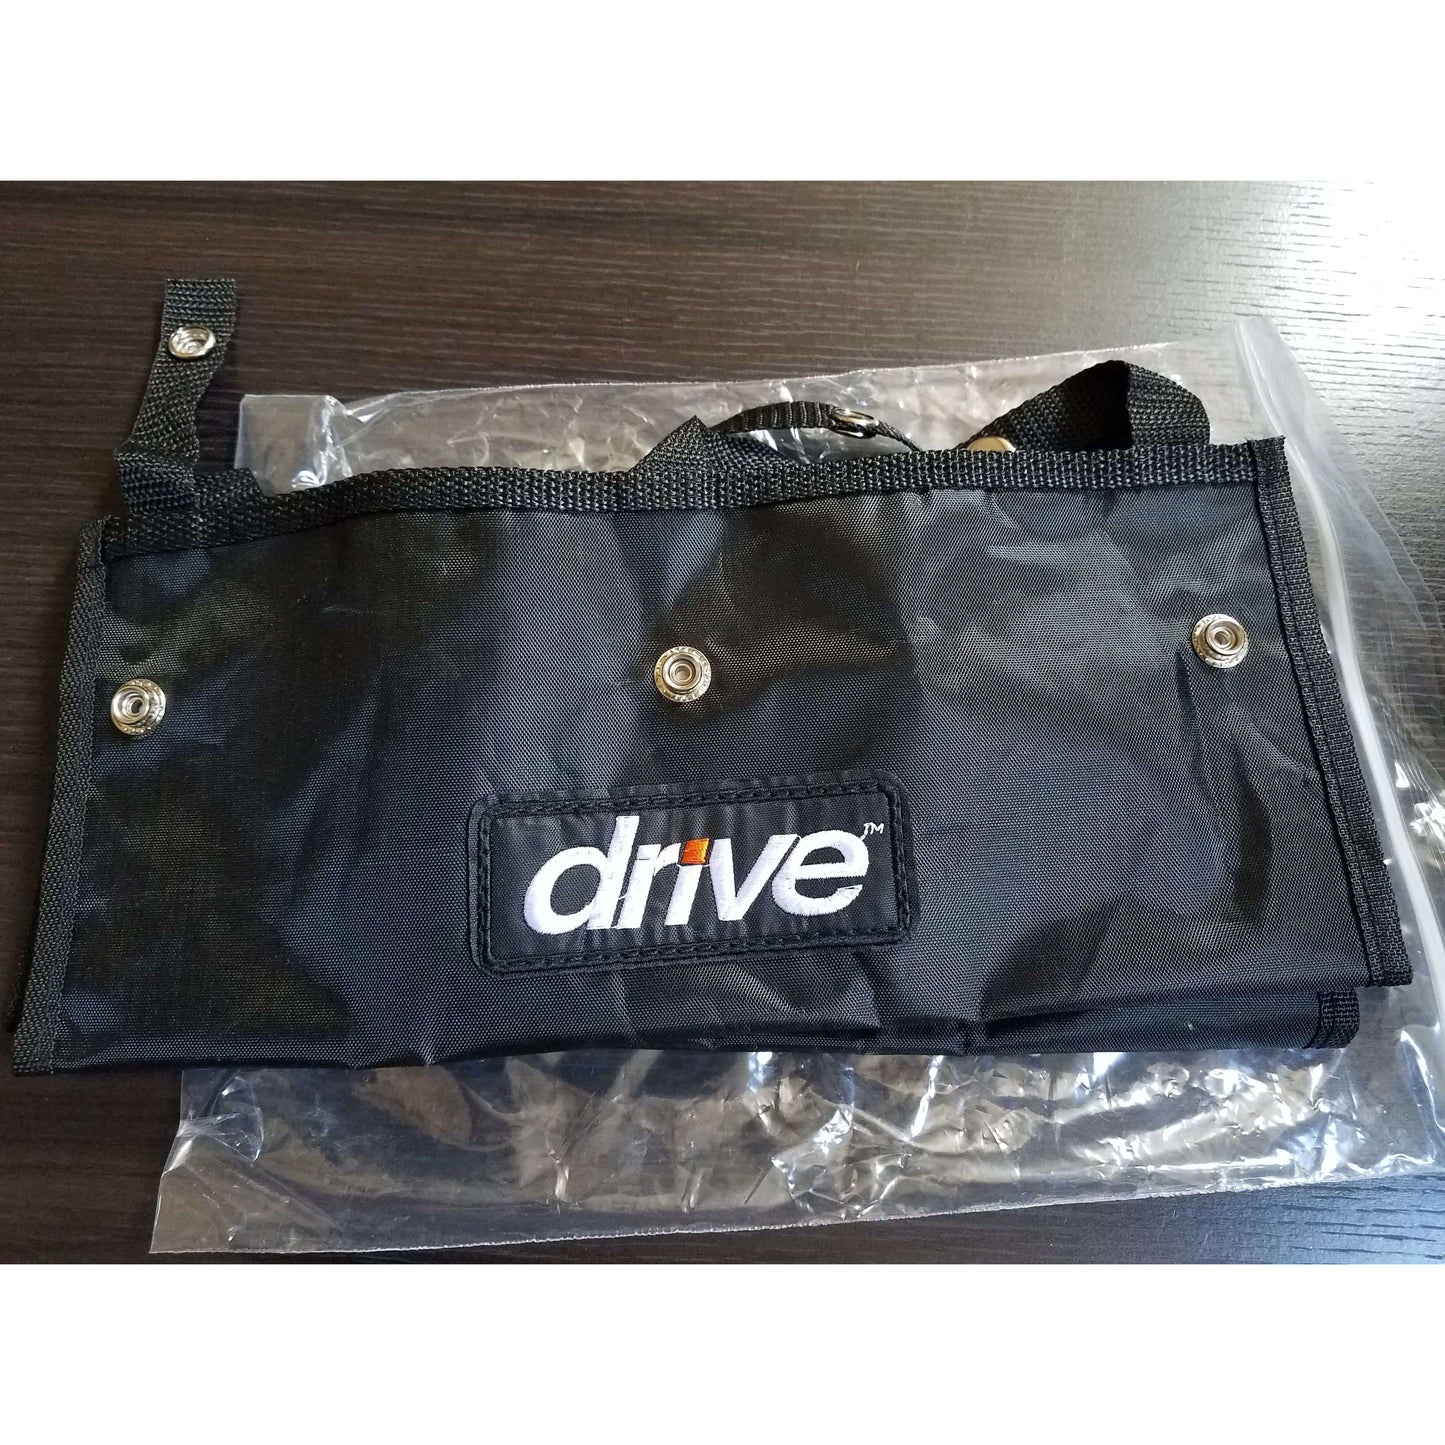 9505W1026120 Replacement tote bag for Drive 10261,R726,R728,R800,R900 Rollators